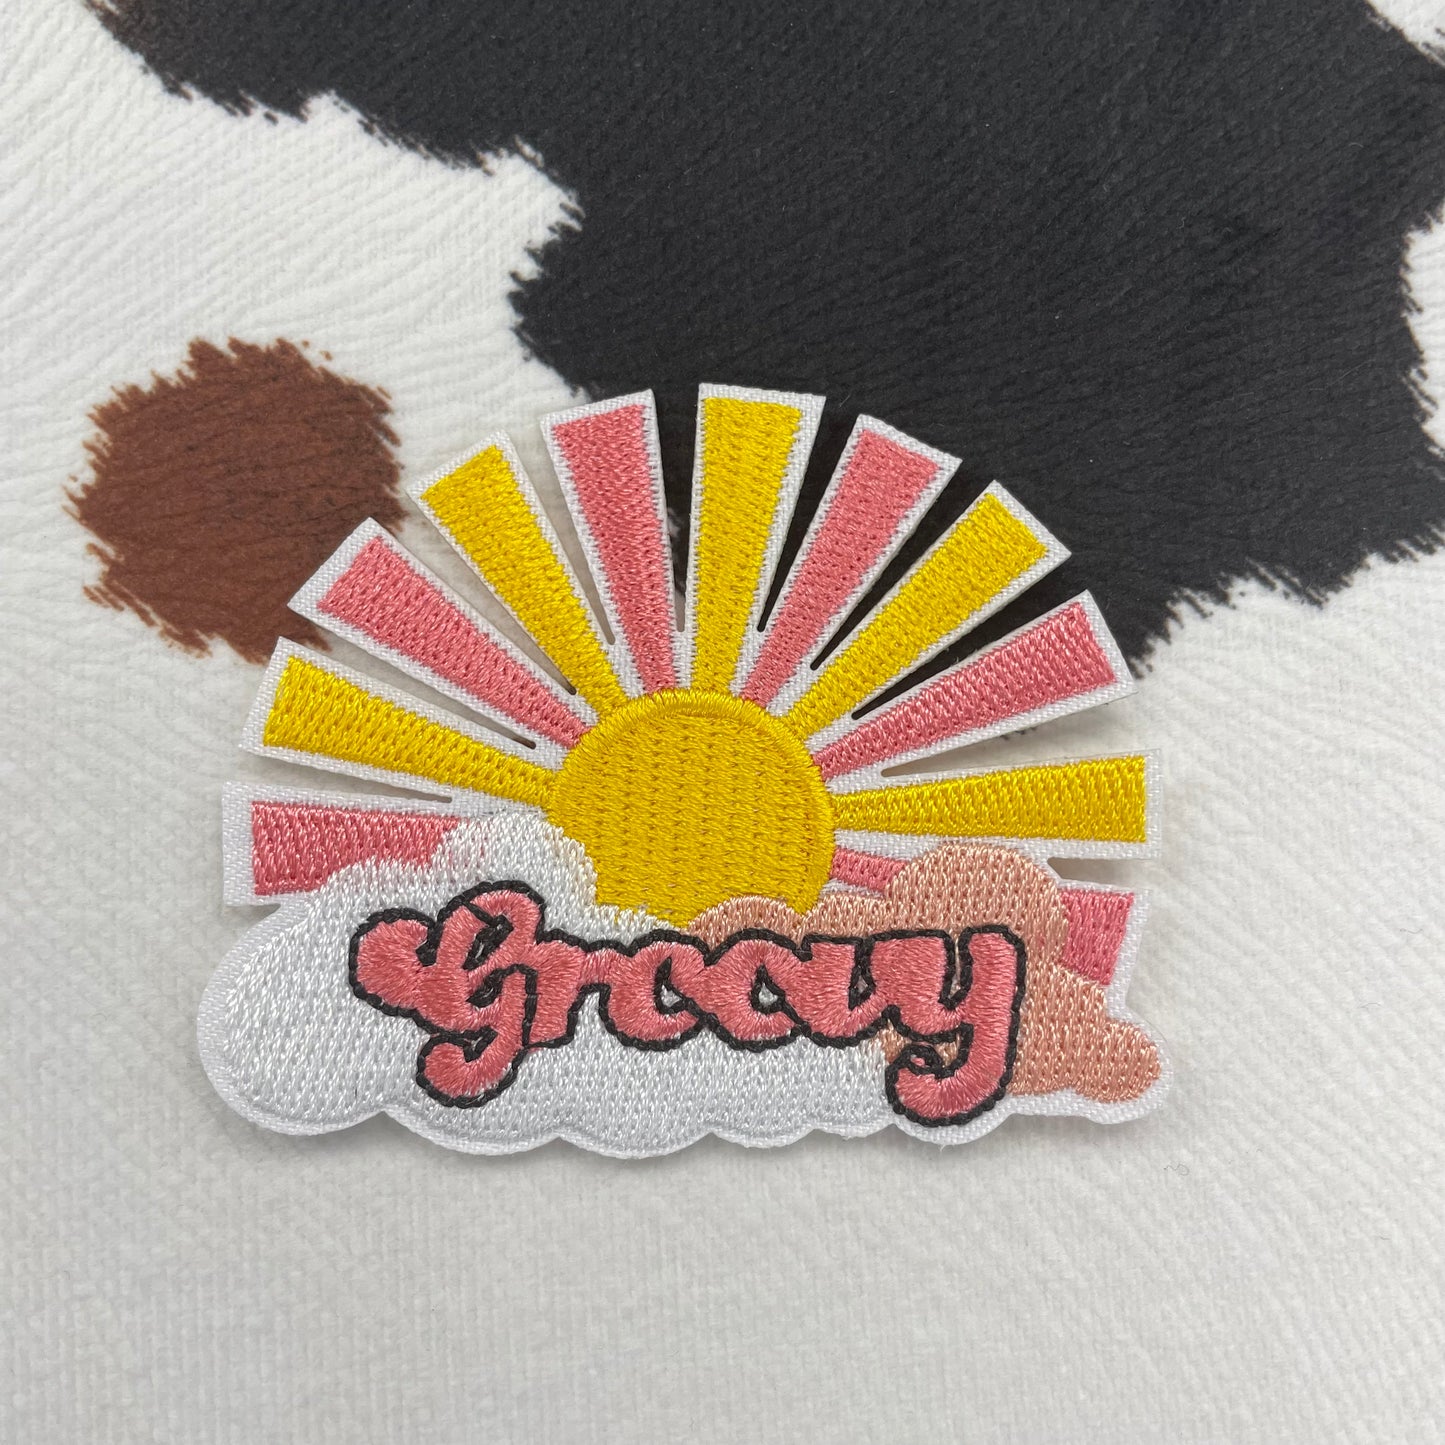 Groovy Sunshine- 2.4" wide Embroidery Patch